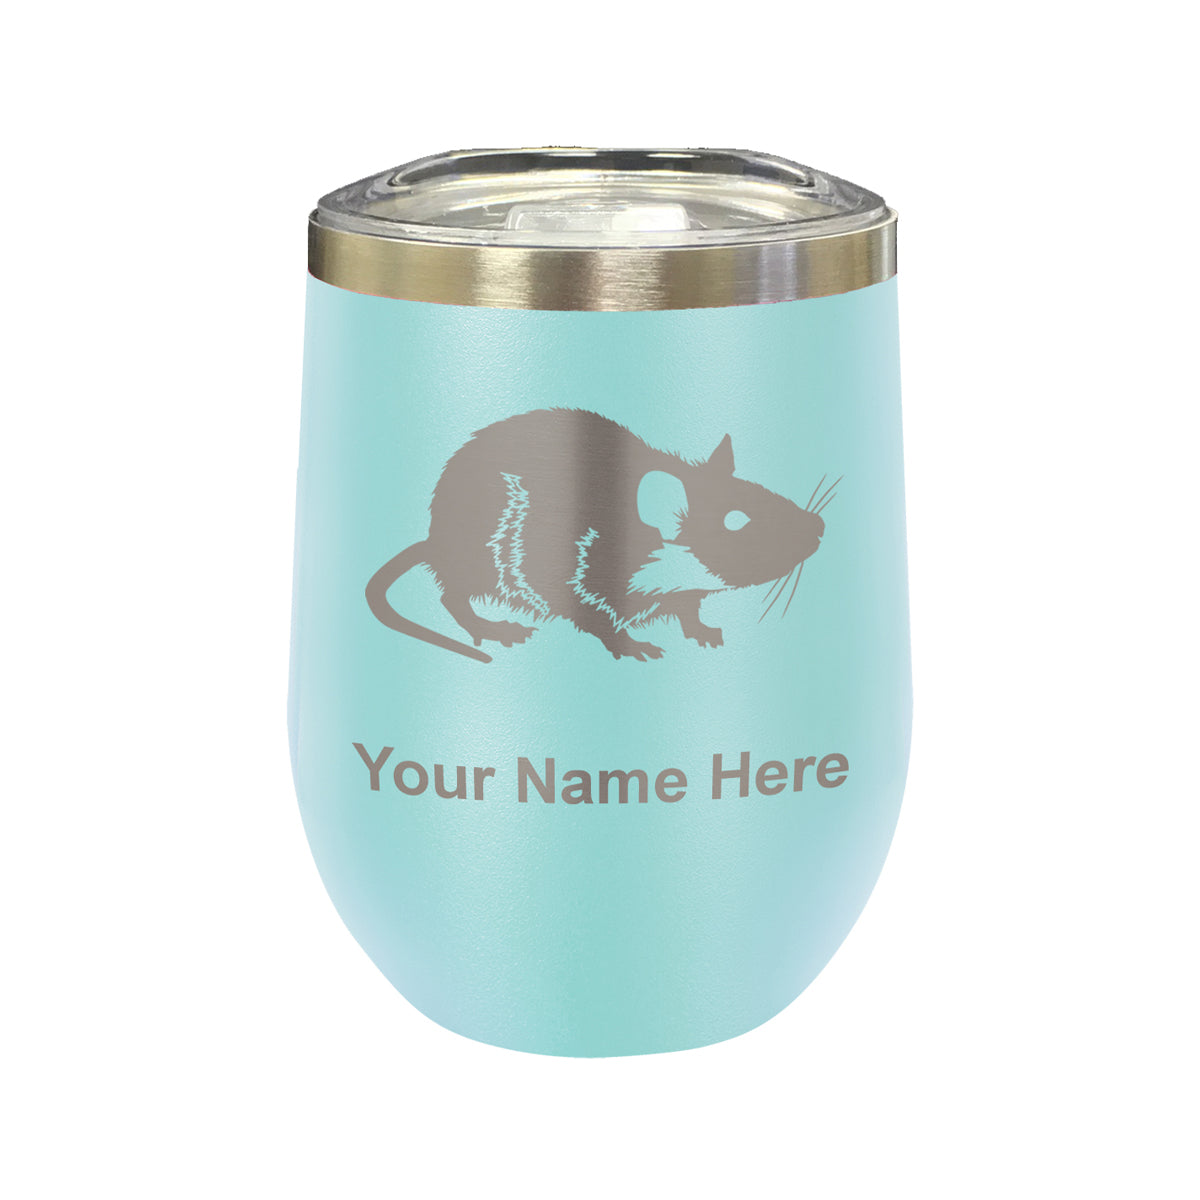 LaserGram Double Wall Stainless Steel Wine Glass, Rat, Personalized Engraving Included